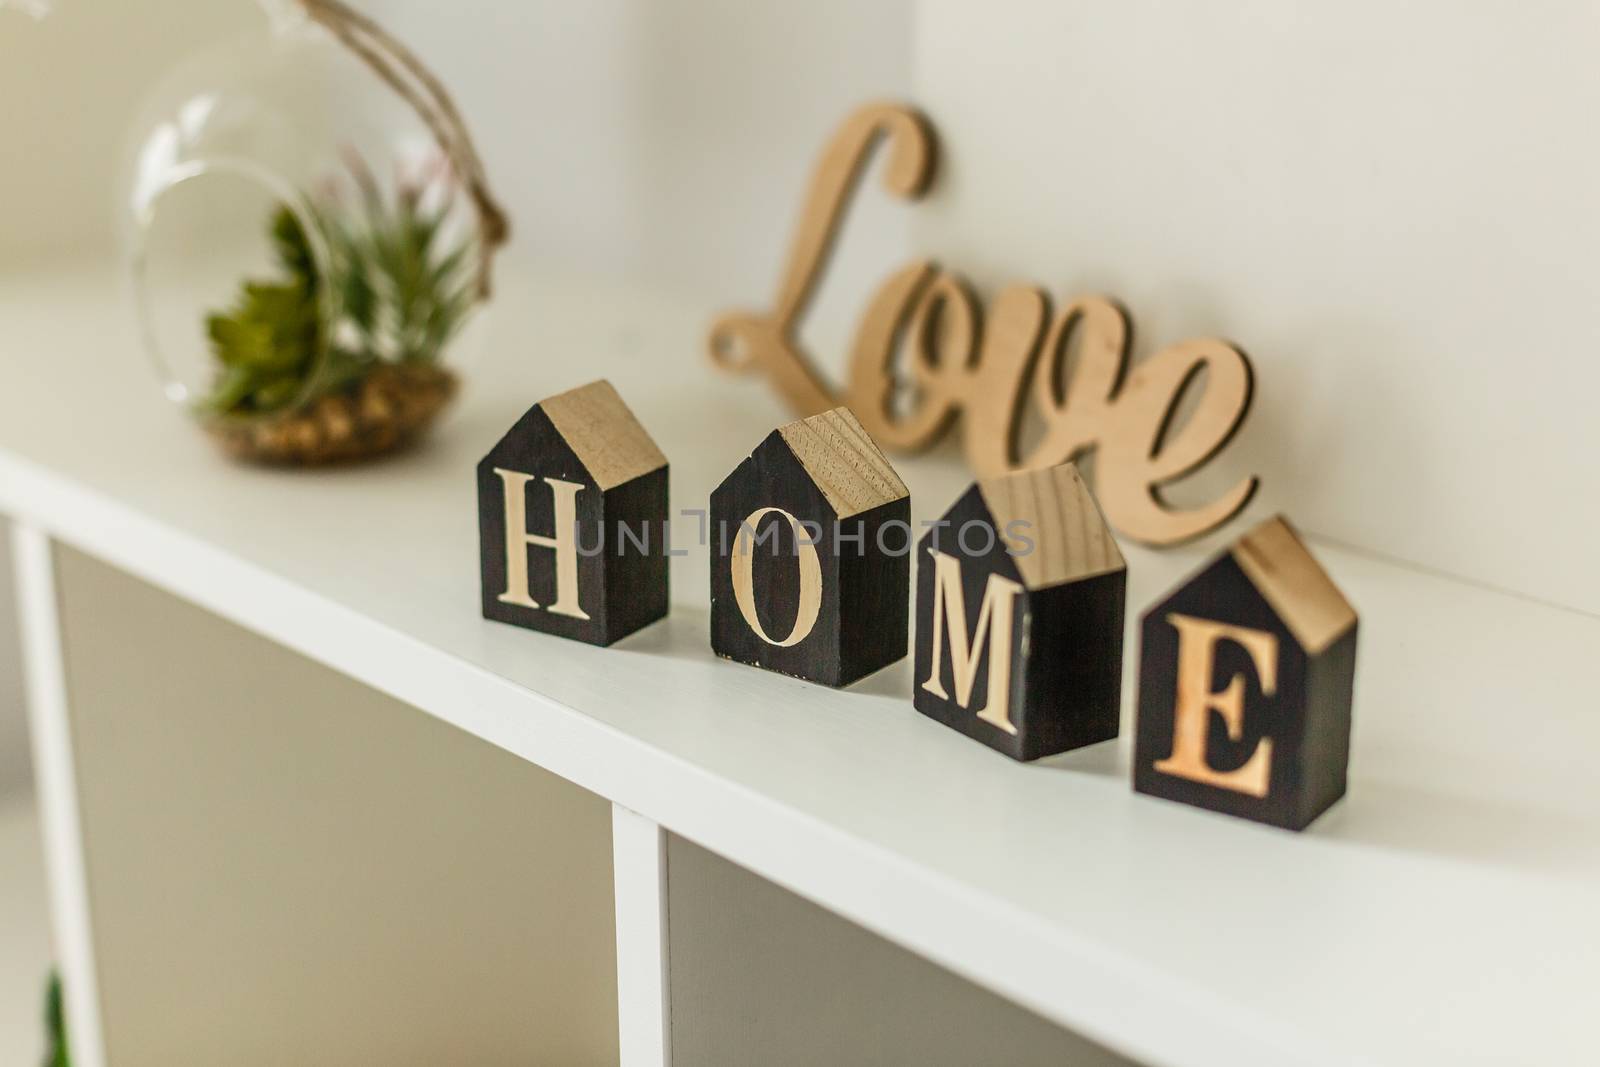 Word home on white wooden background with copy space. Home word concept. Home word written on black wooden houses.